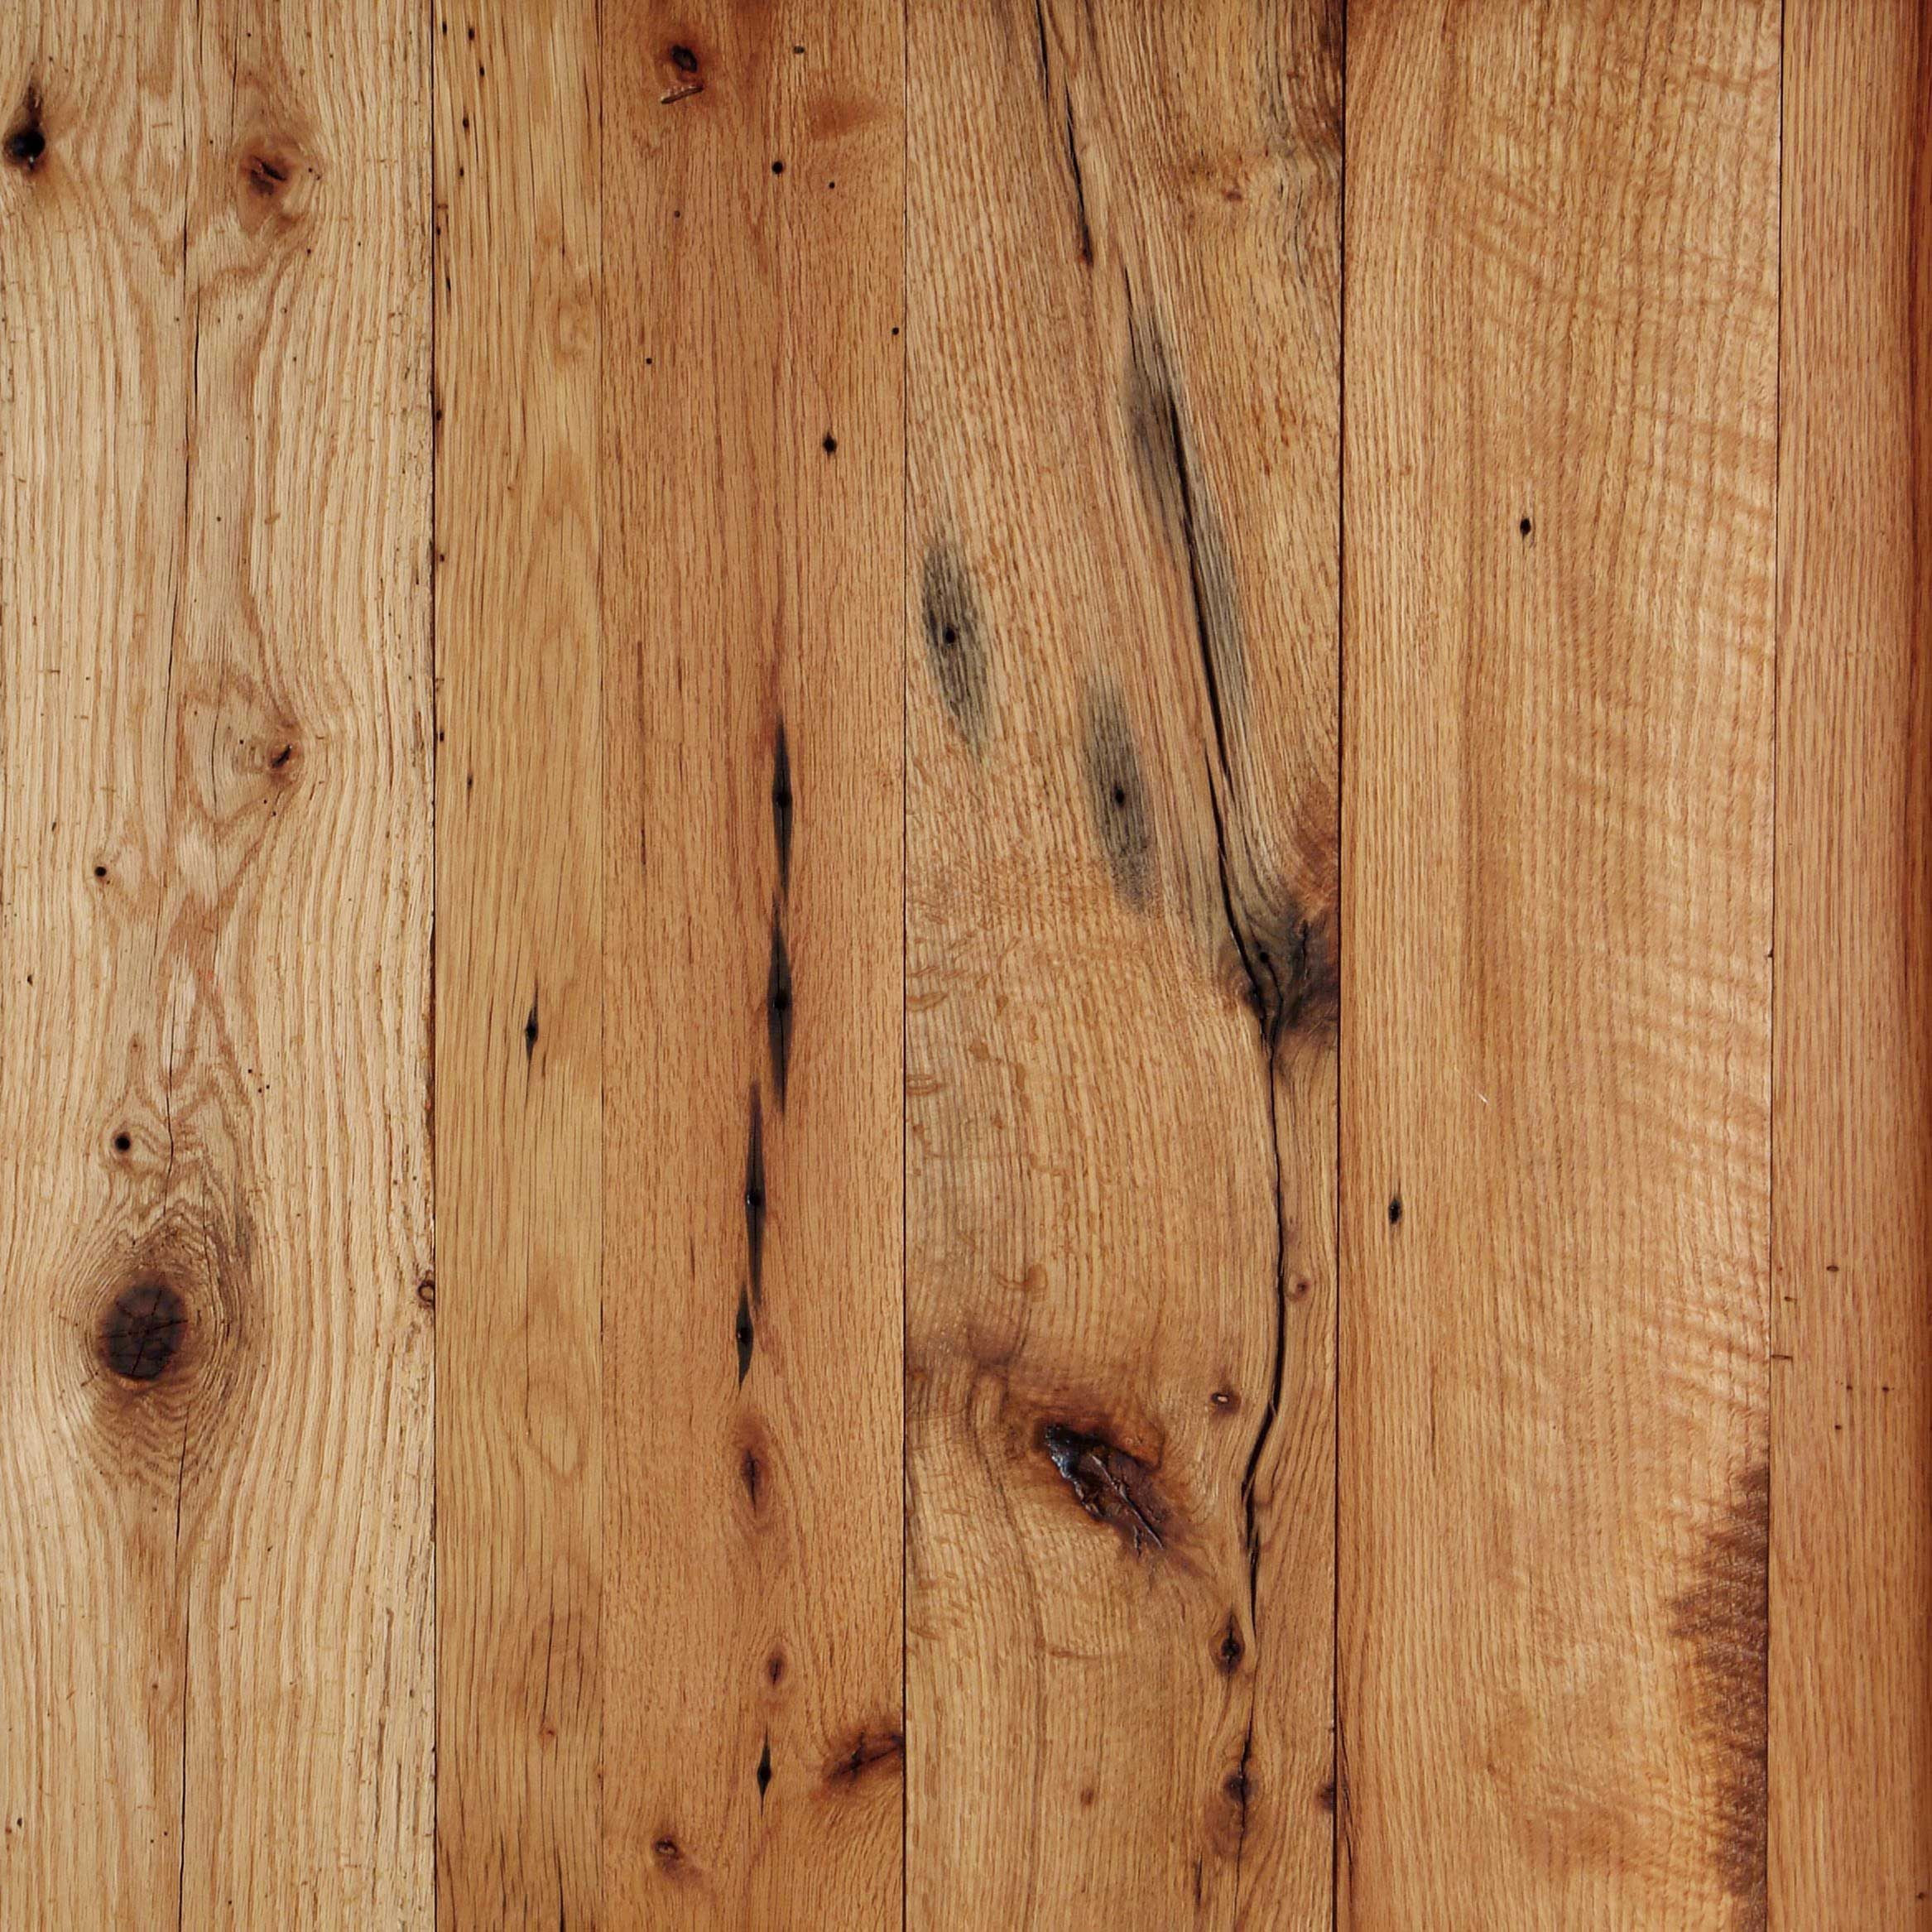 21 Stylish Hardwood Floor Refinishing Downers Grove Il 2024 free download hardwood floor refinishing downers grove il of reclaimed salvaged antique red oak flooring wide boards knots regarding reclaimed salvaged antique red oak flooring wide boards knots